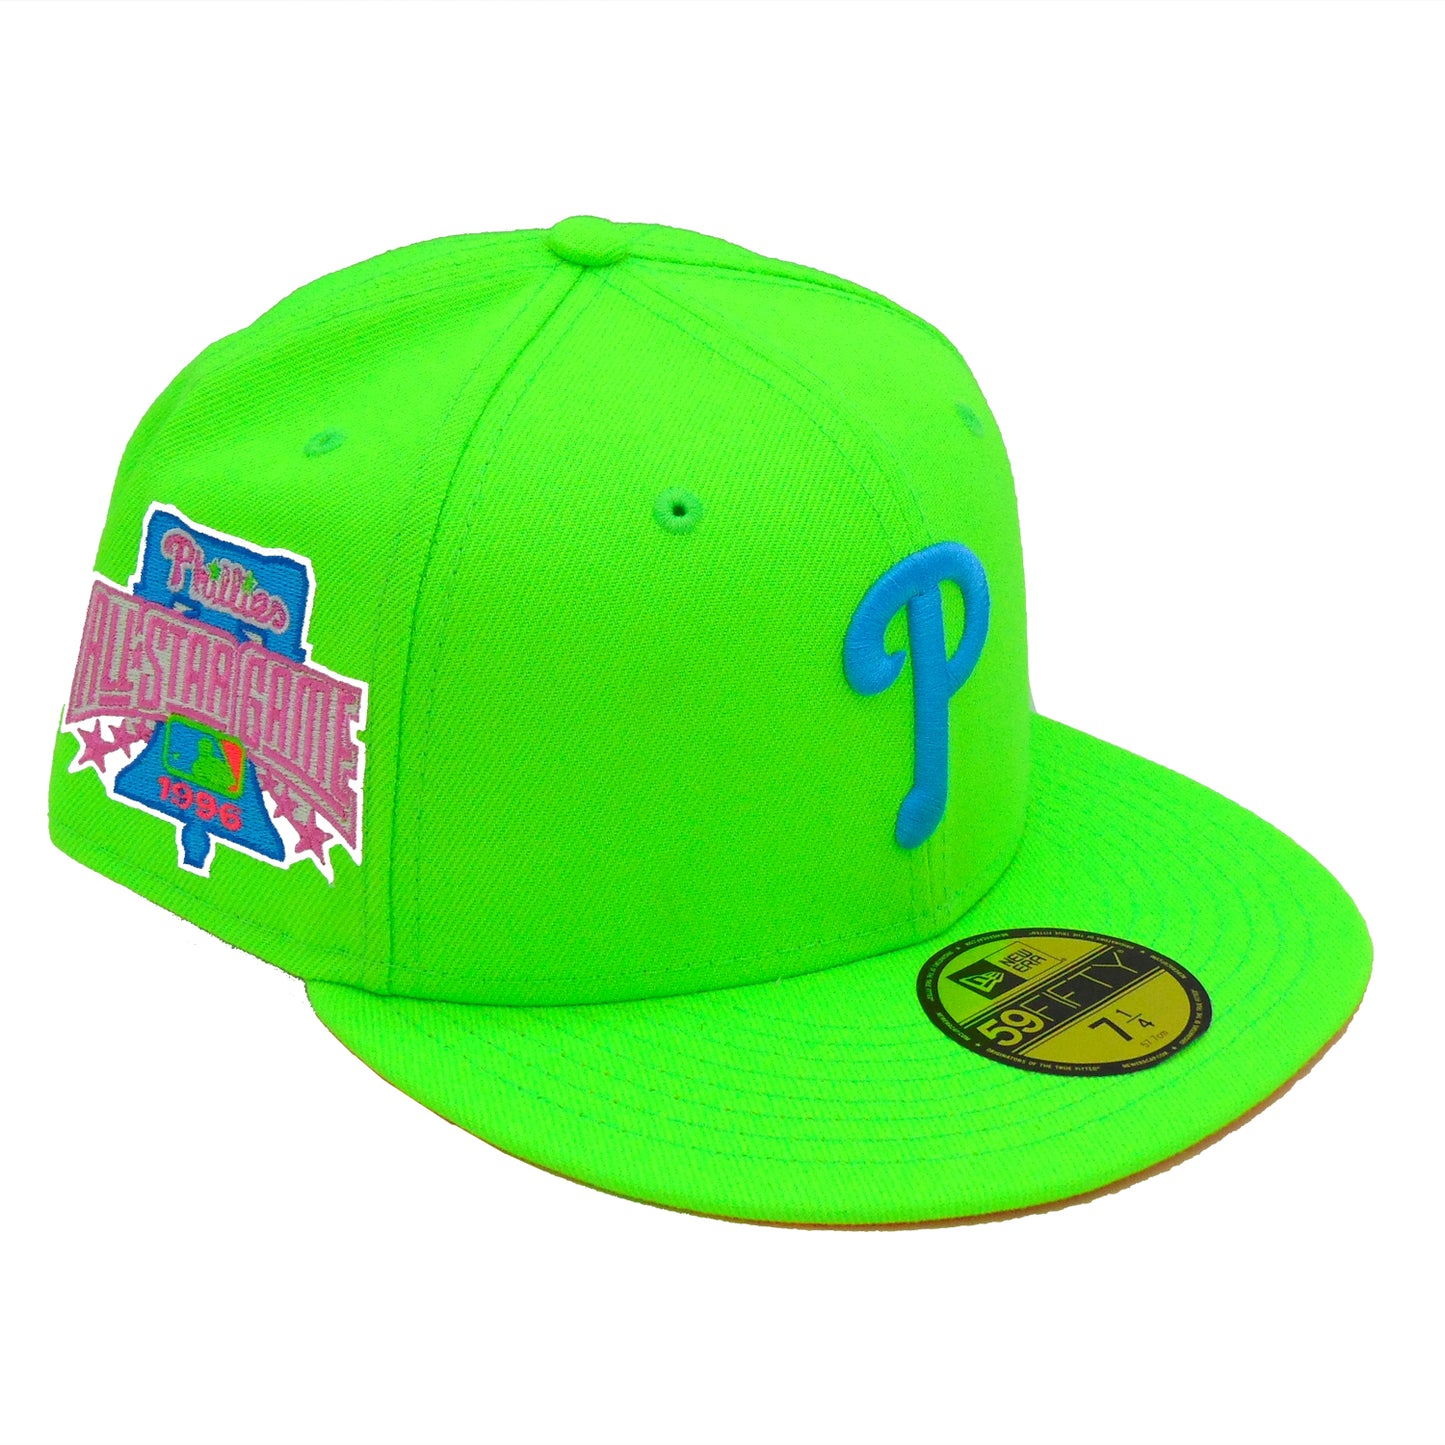 New Era Purple Philadelphia Phillies Lime Side Patch 59FIFTY Fitted Hat